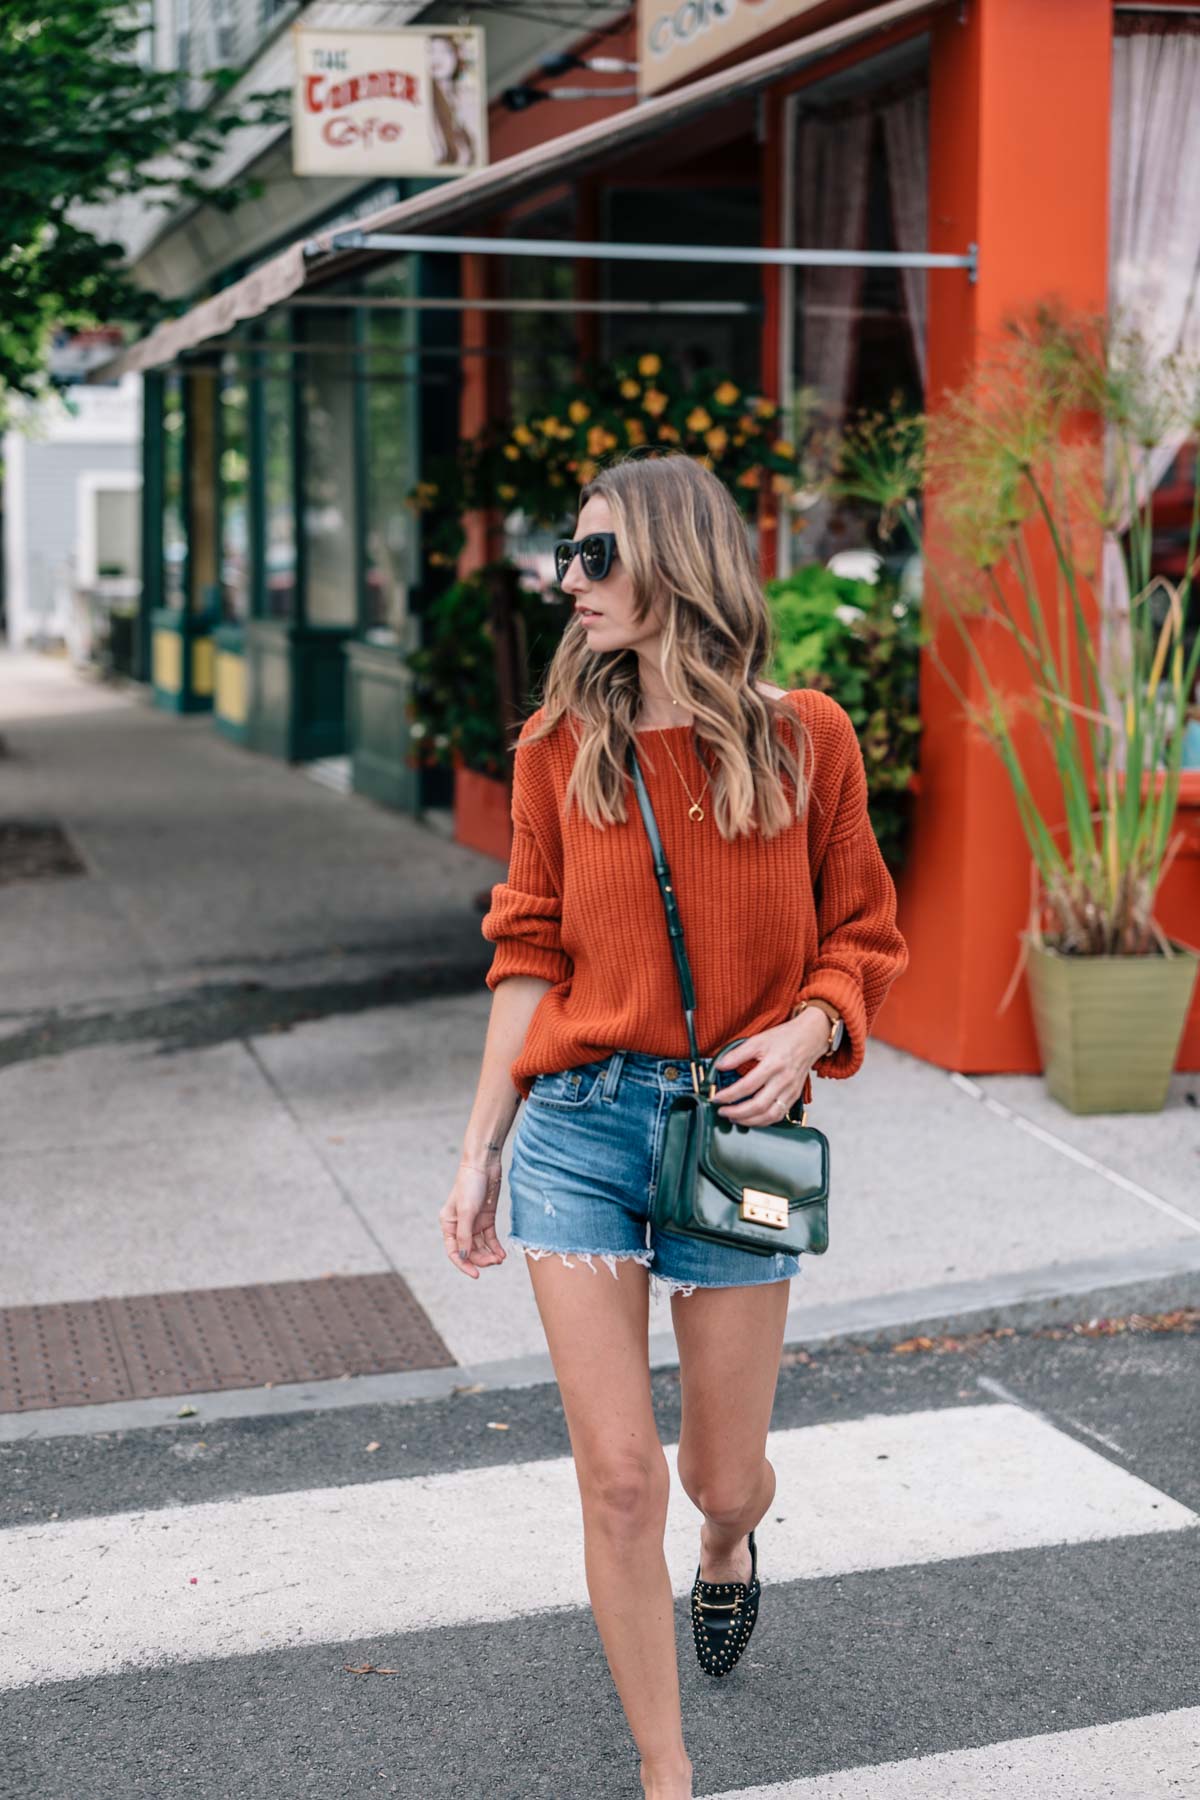 Jess Ann Kirby fall color trend street style in a chunky knit sweater, jean shorts, and slides